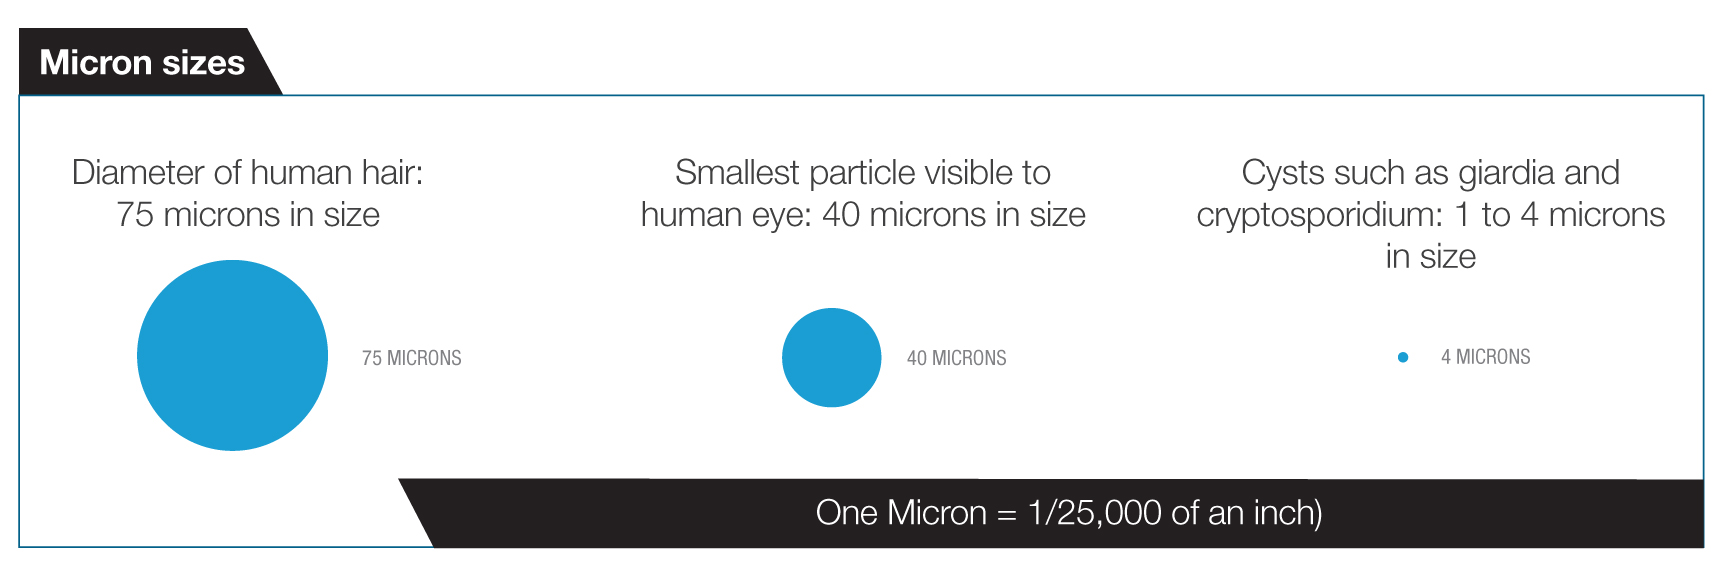 micron-size-graphic